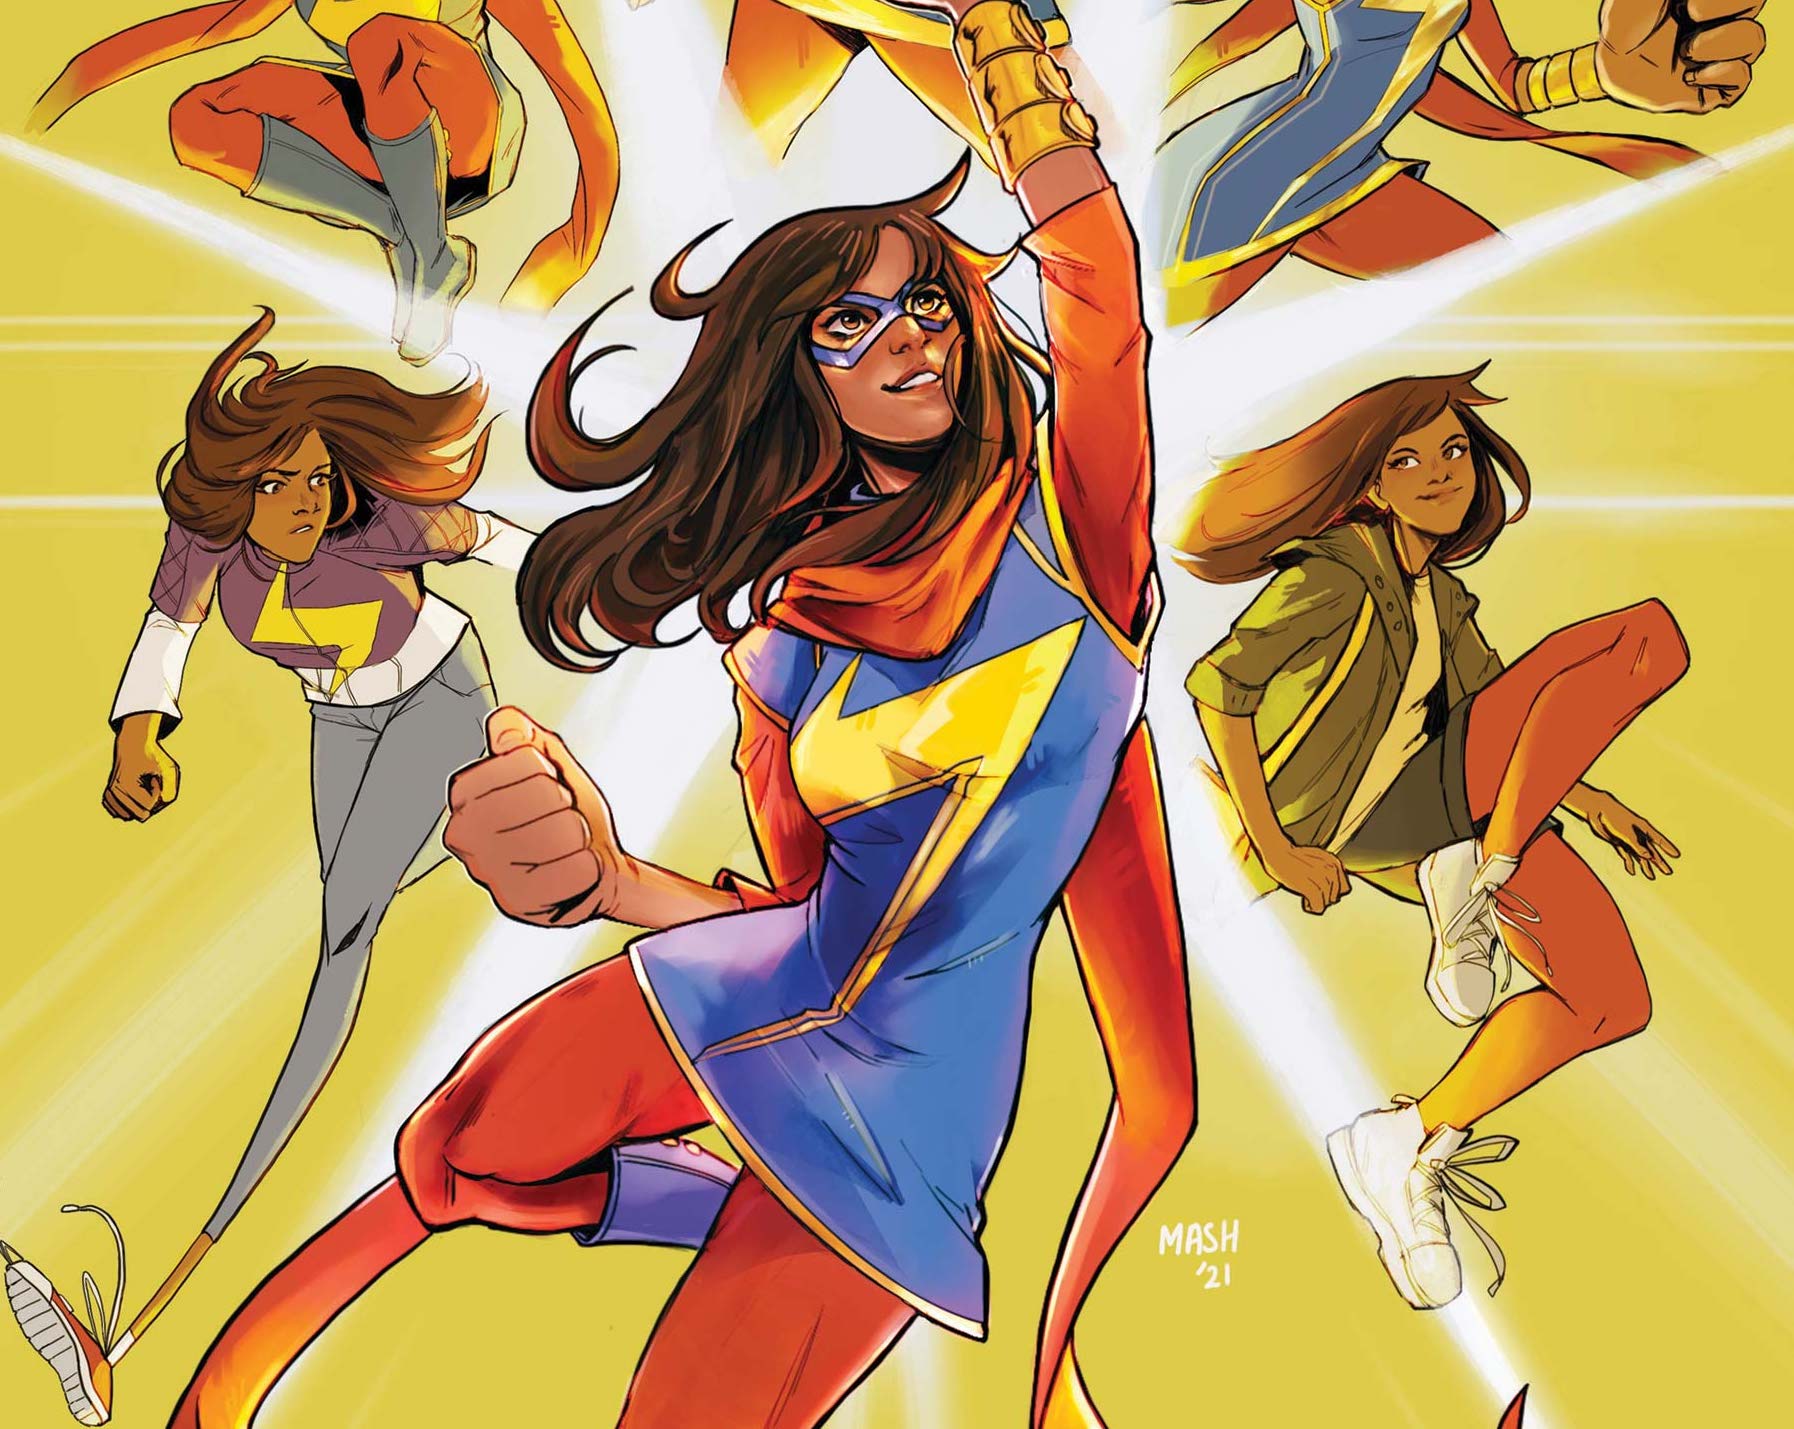 'Ms. Marvel: Beyond the Limit' #1 is a fun chapter in Kamala's history